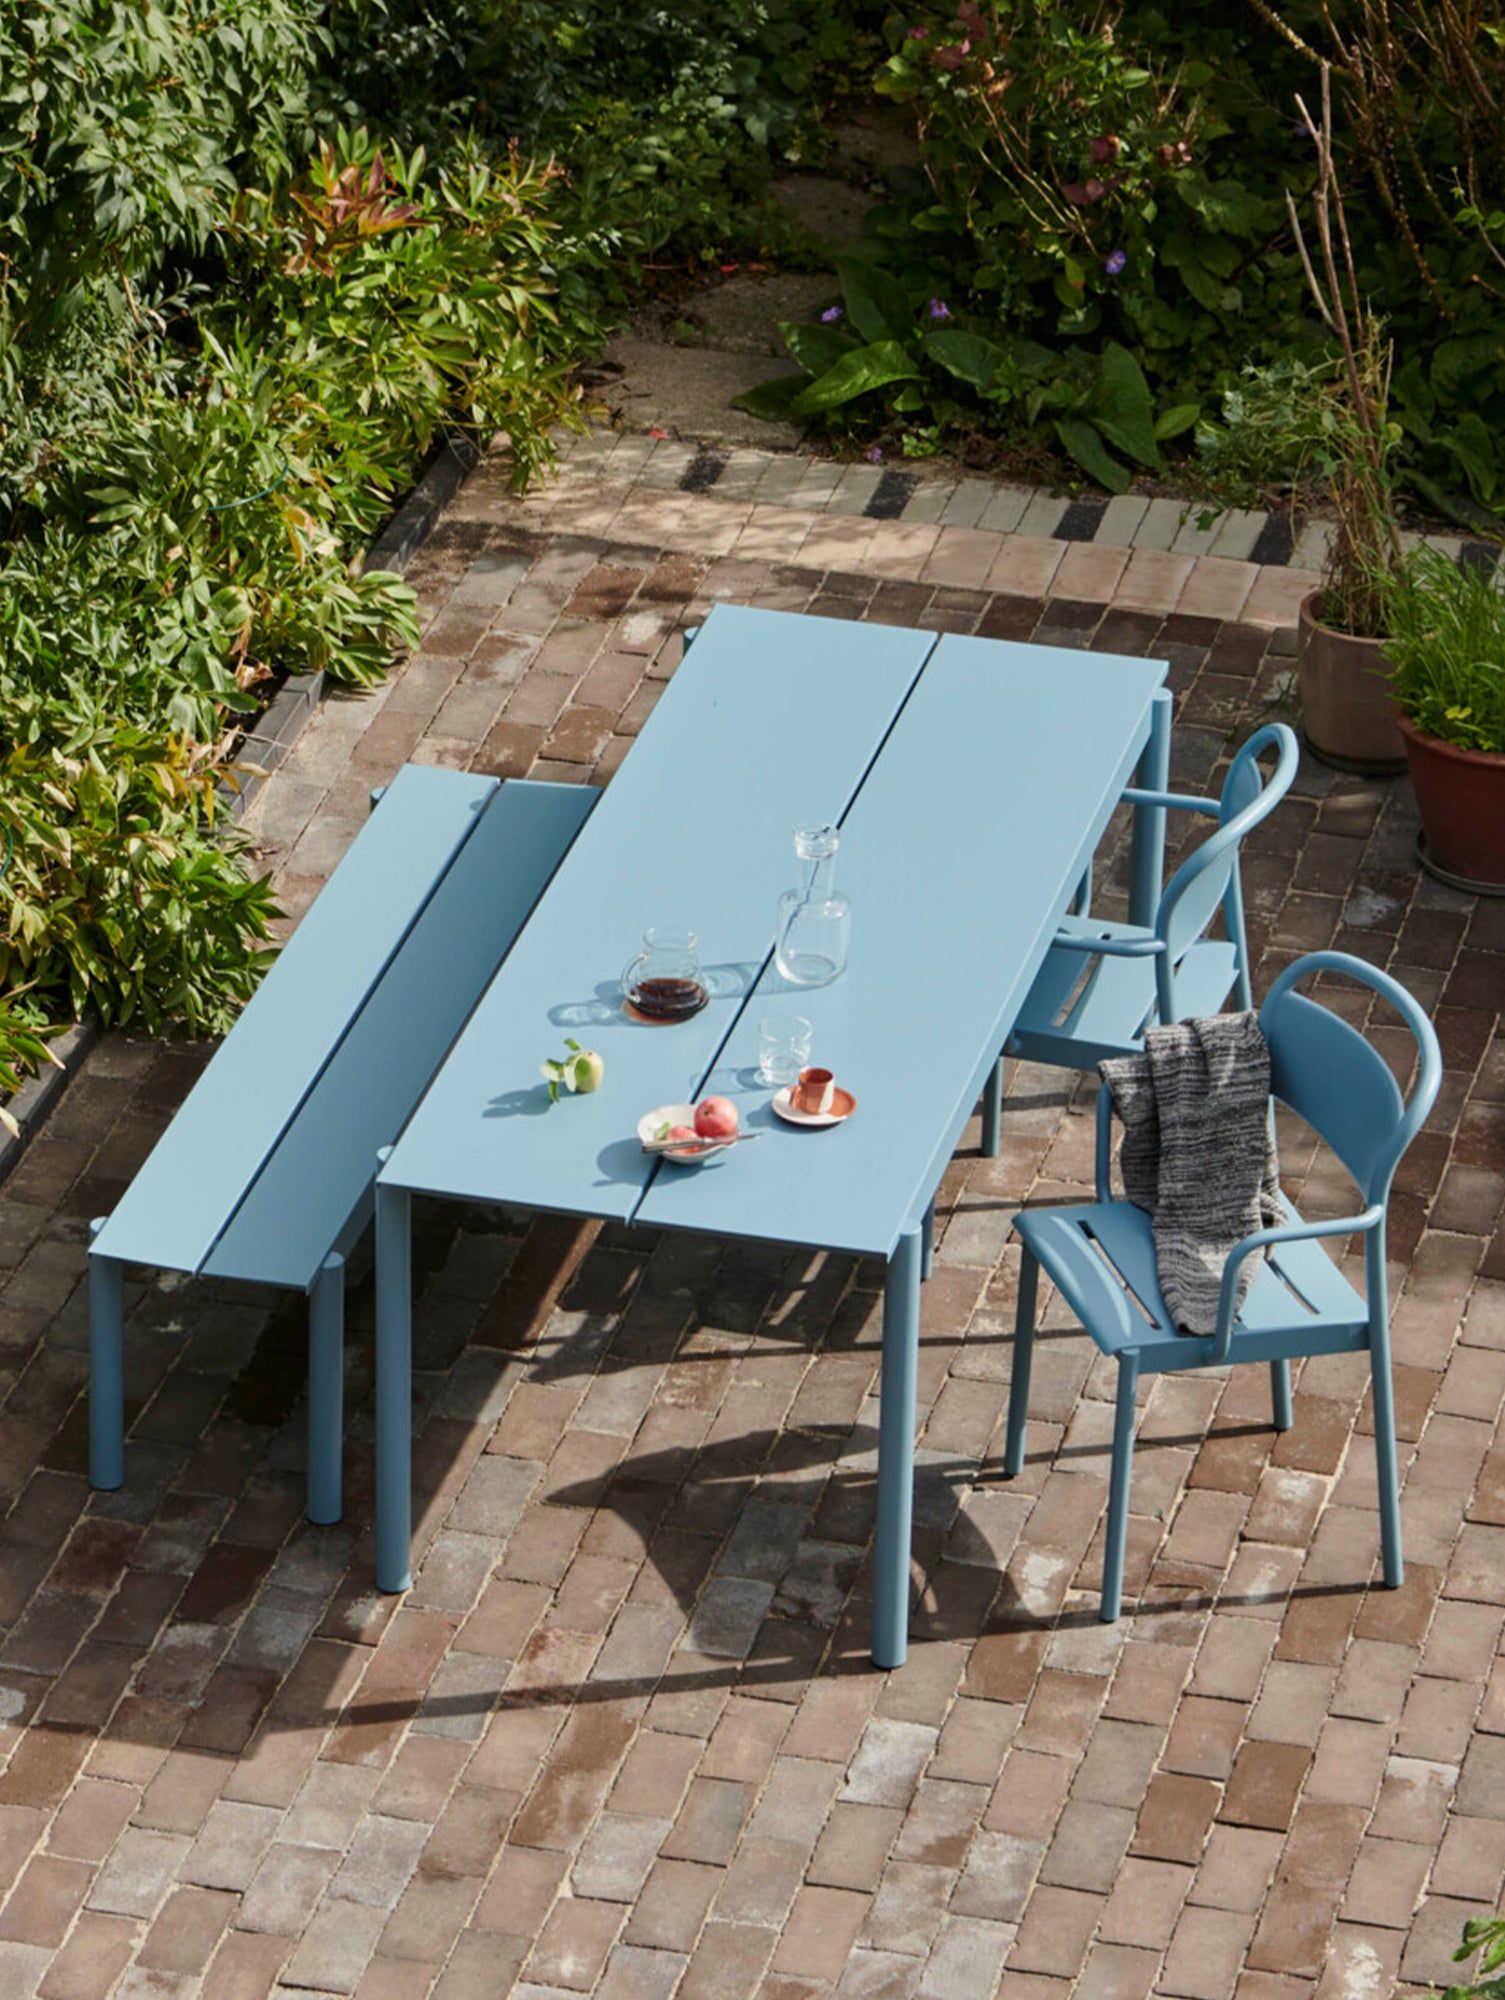 The Beauty of Outdoor Table and Chair Sets for Enjoying the Great Outdoors